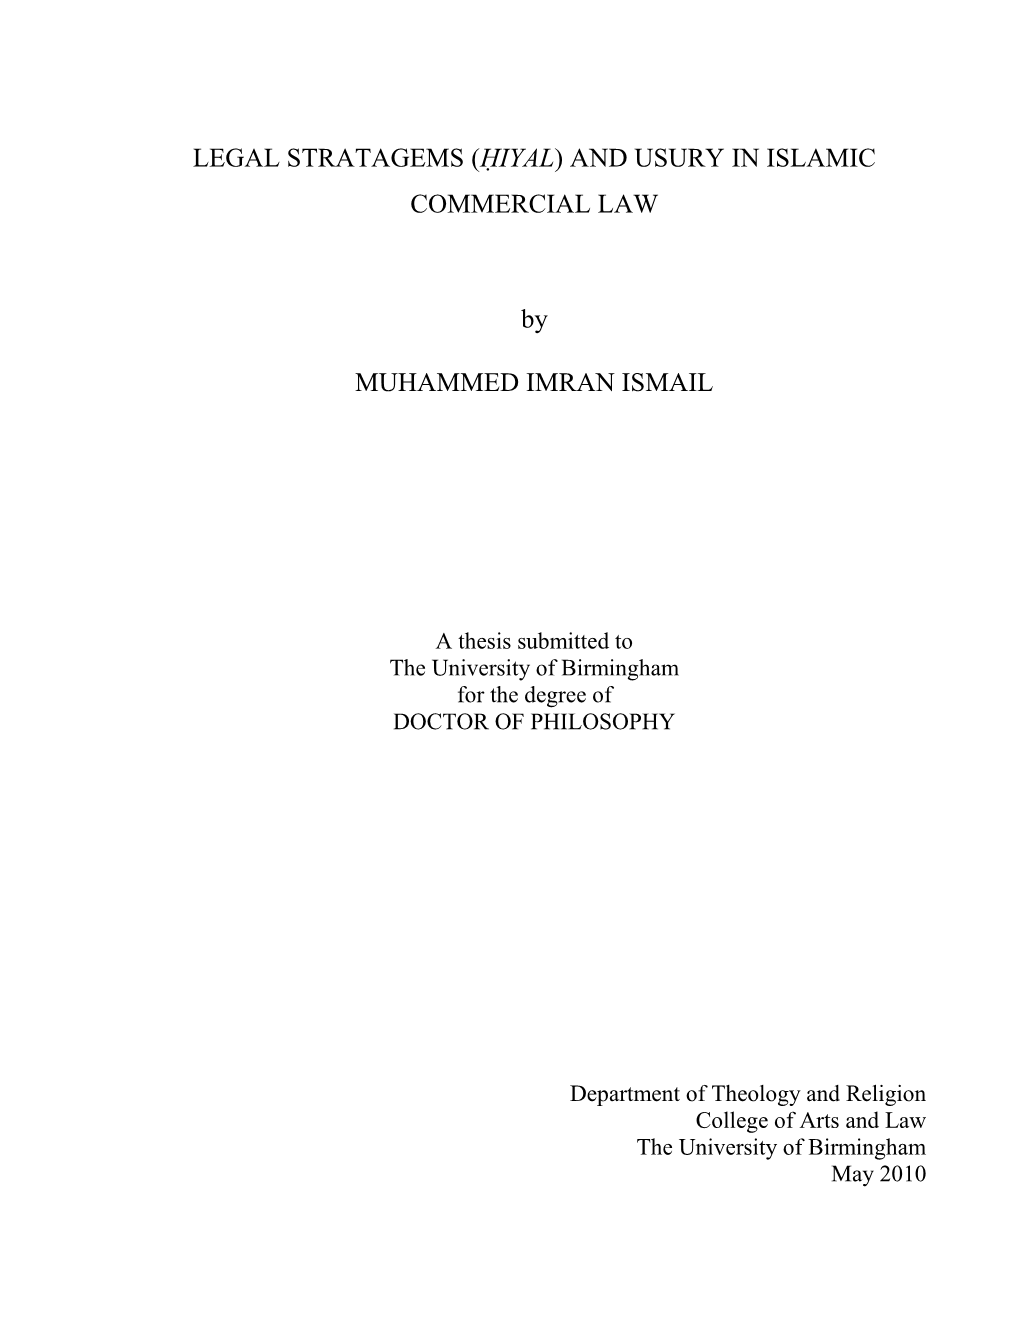 (Ḥiyal) and Usury in Islamic Commercial Law